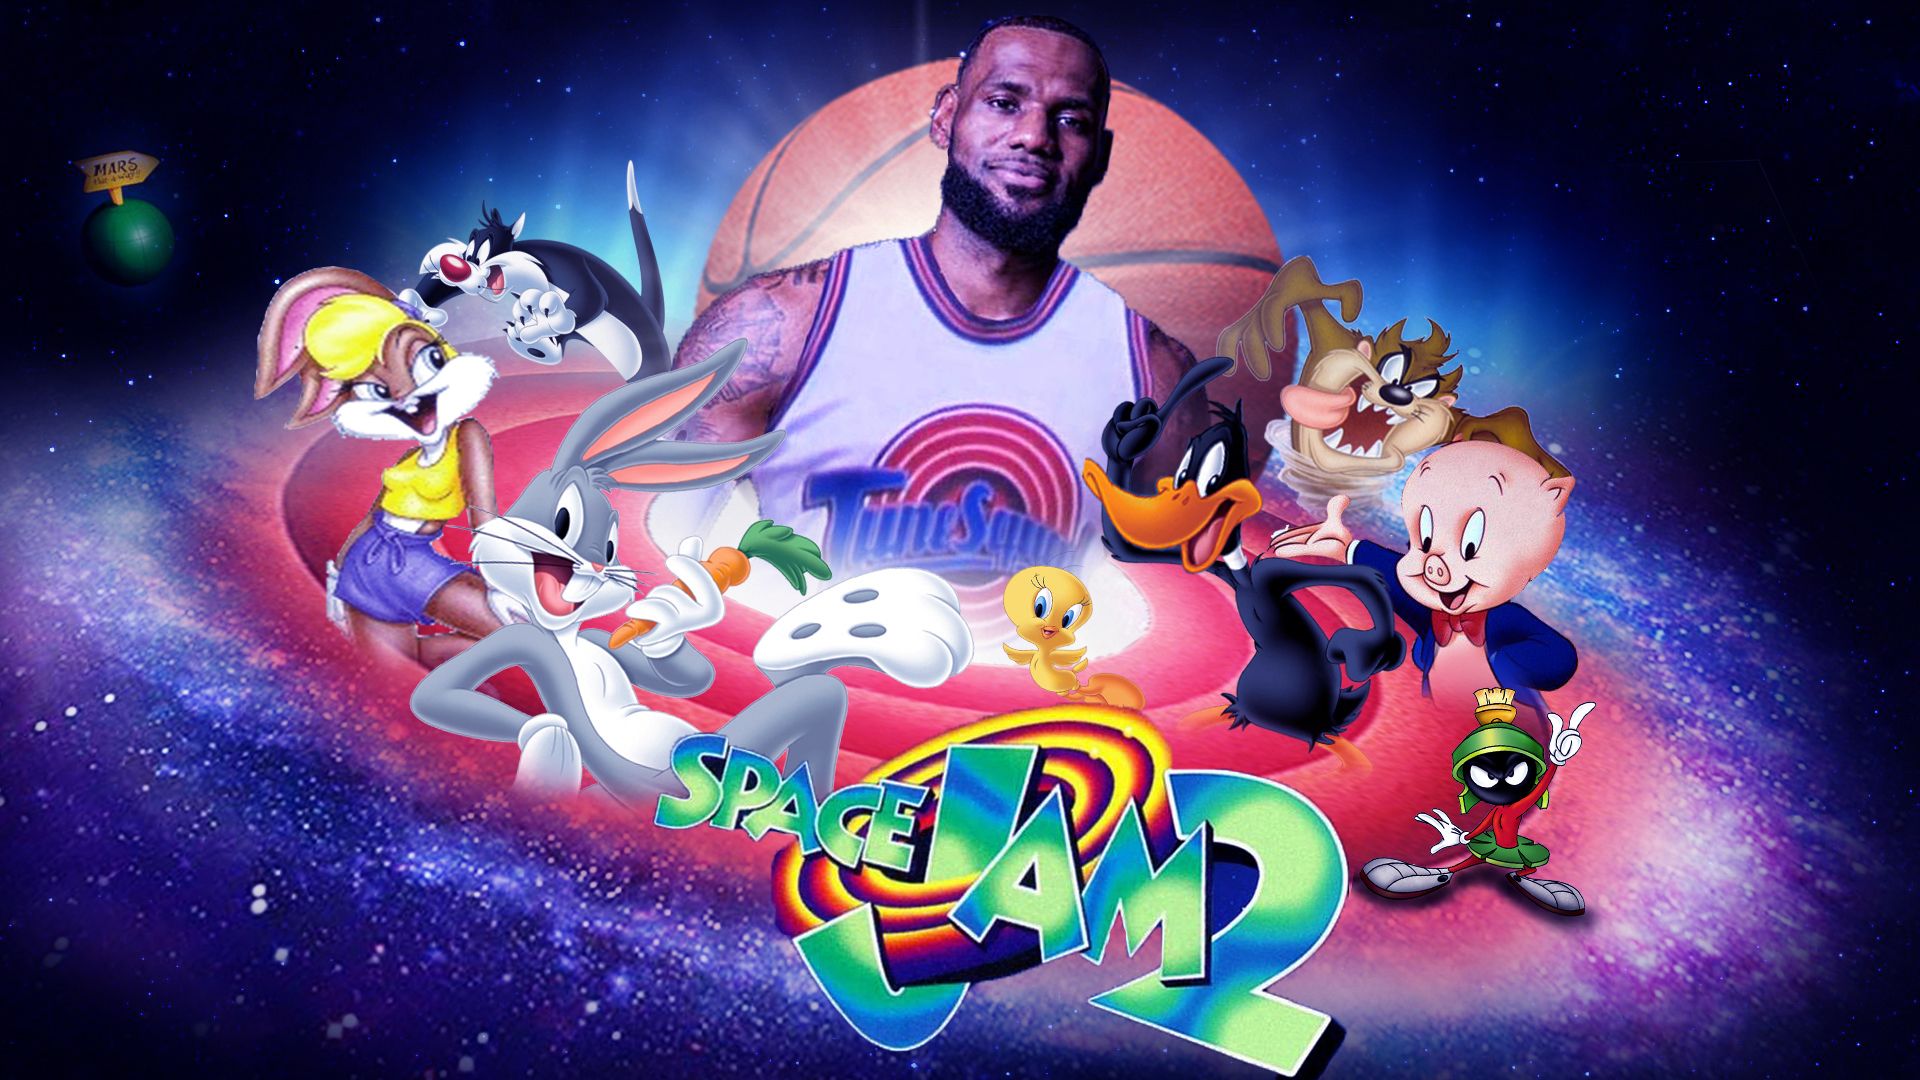 Looney Tunes Basketball Wallpaper Free Looney Tunes Basketball Background